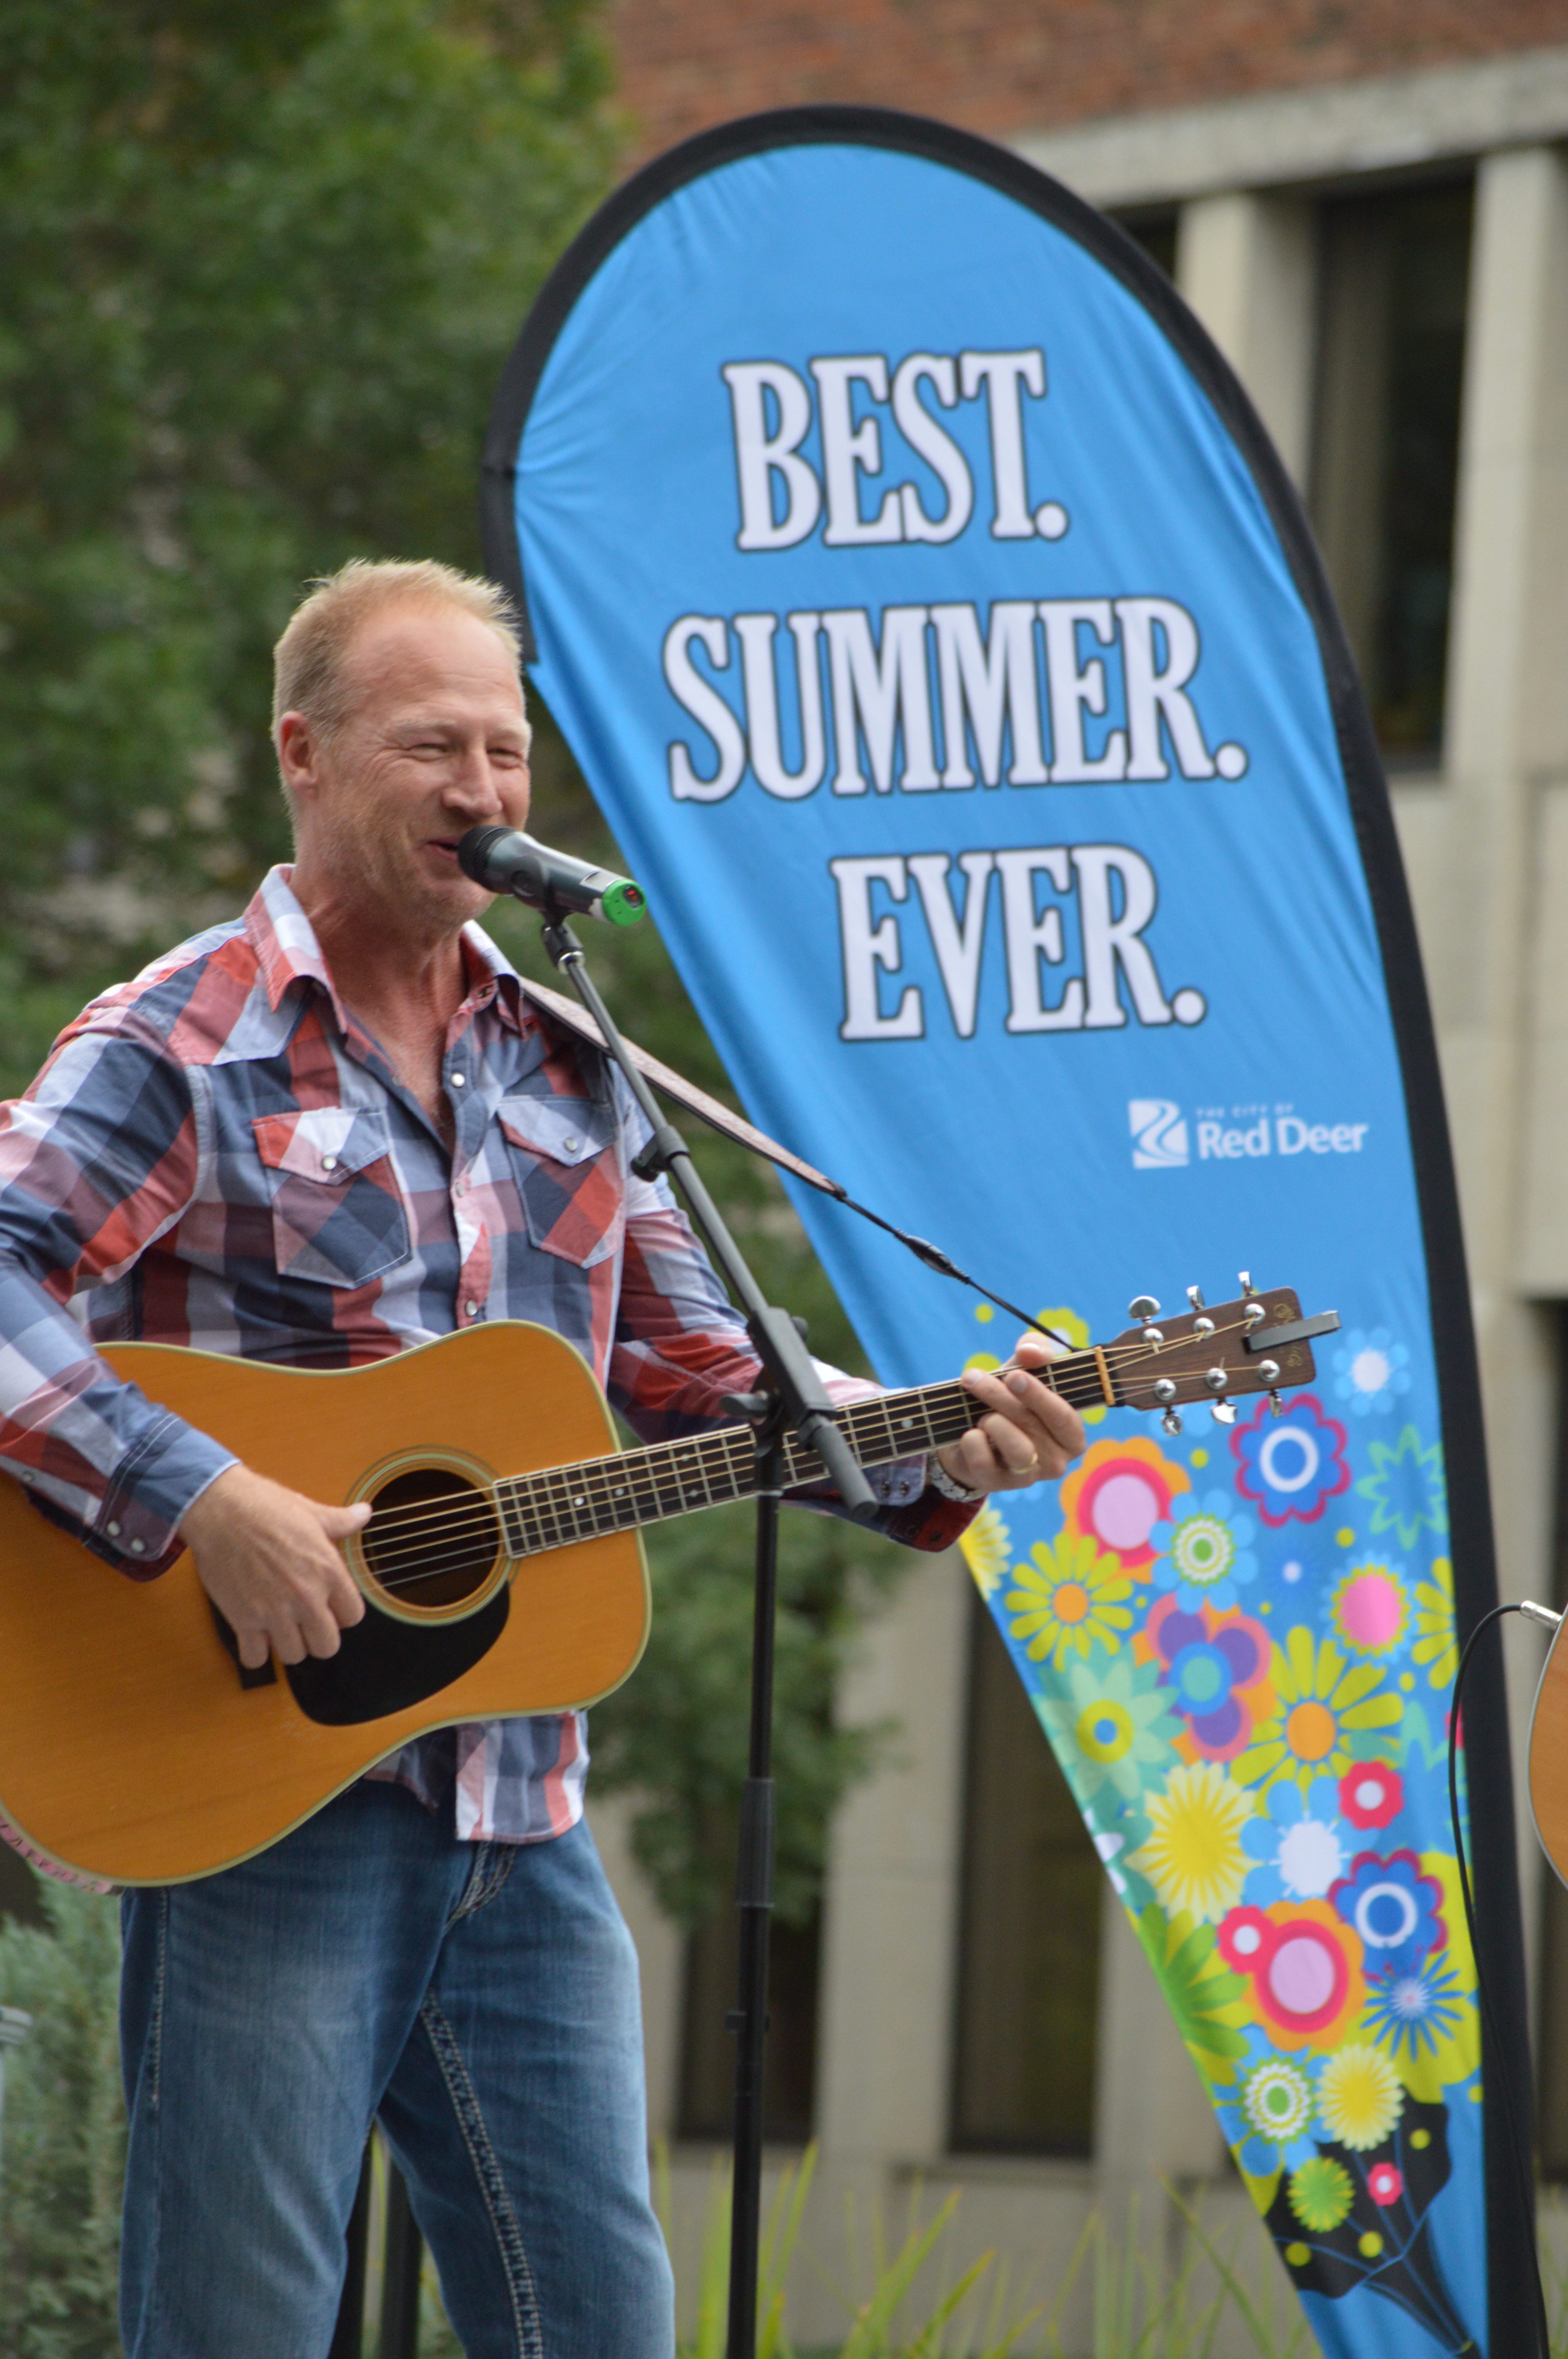 SUPER SUMMER – Duane Steele performs on the Ross Street Patio during a Best Summer Ever event last summer.